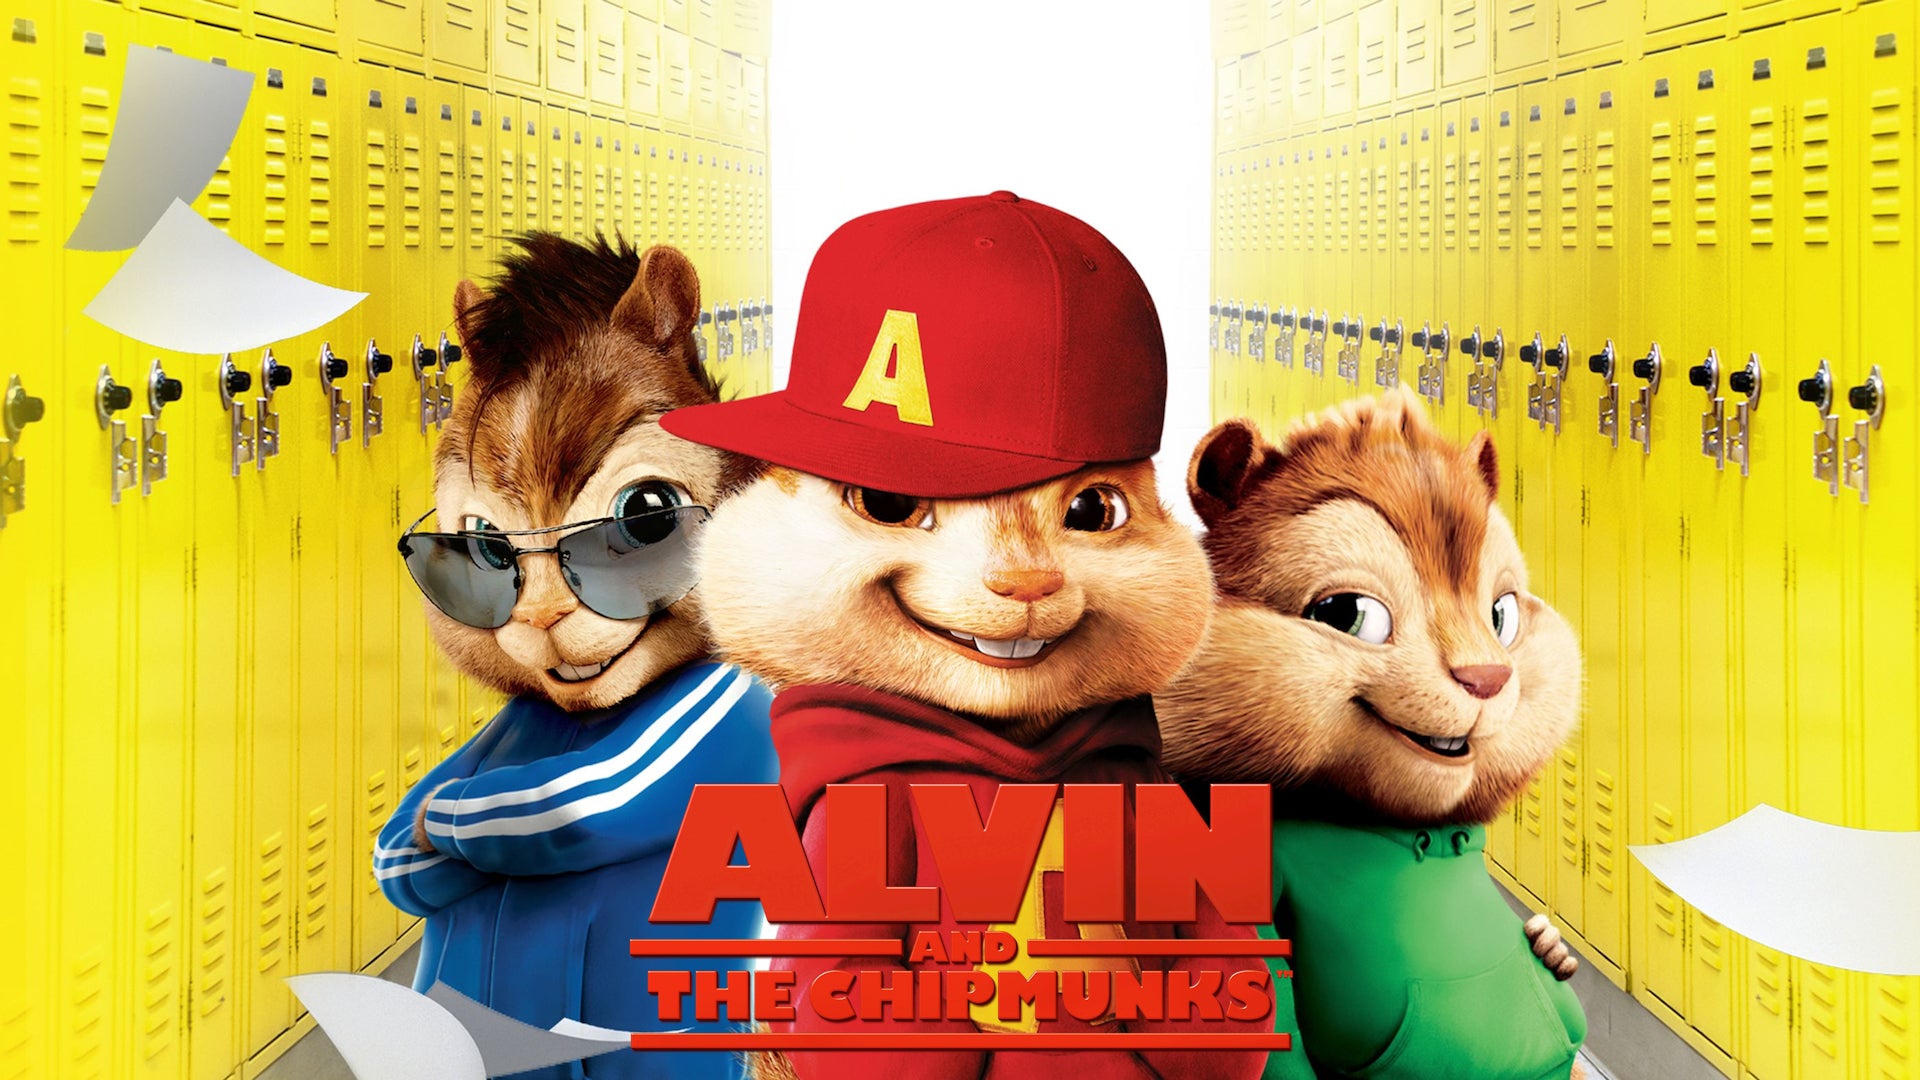 Alvin and the Chipmunks 4 Movie Collection DVD Box Set